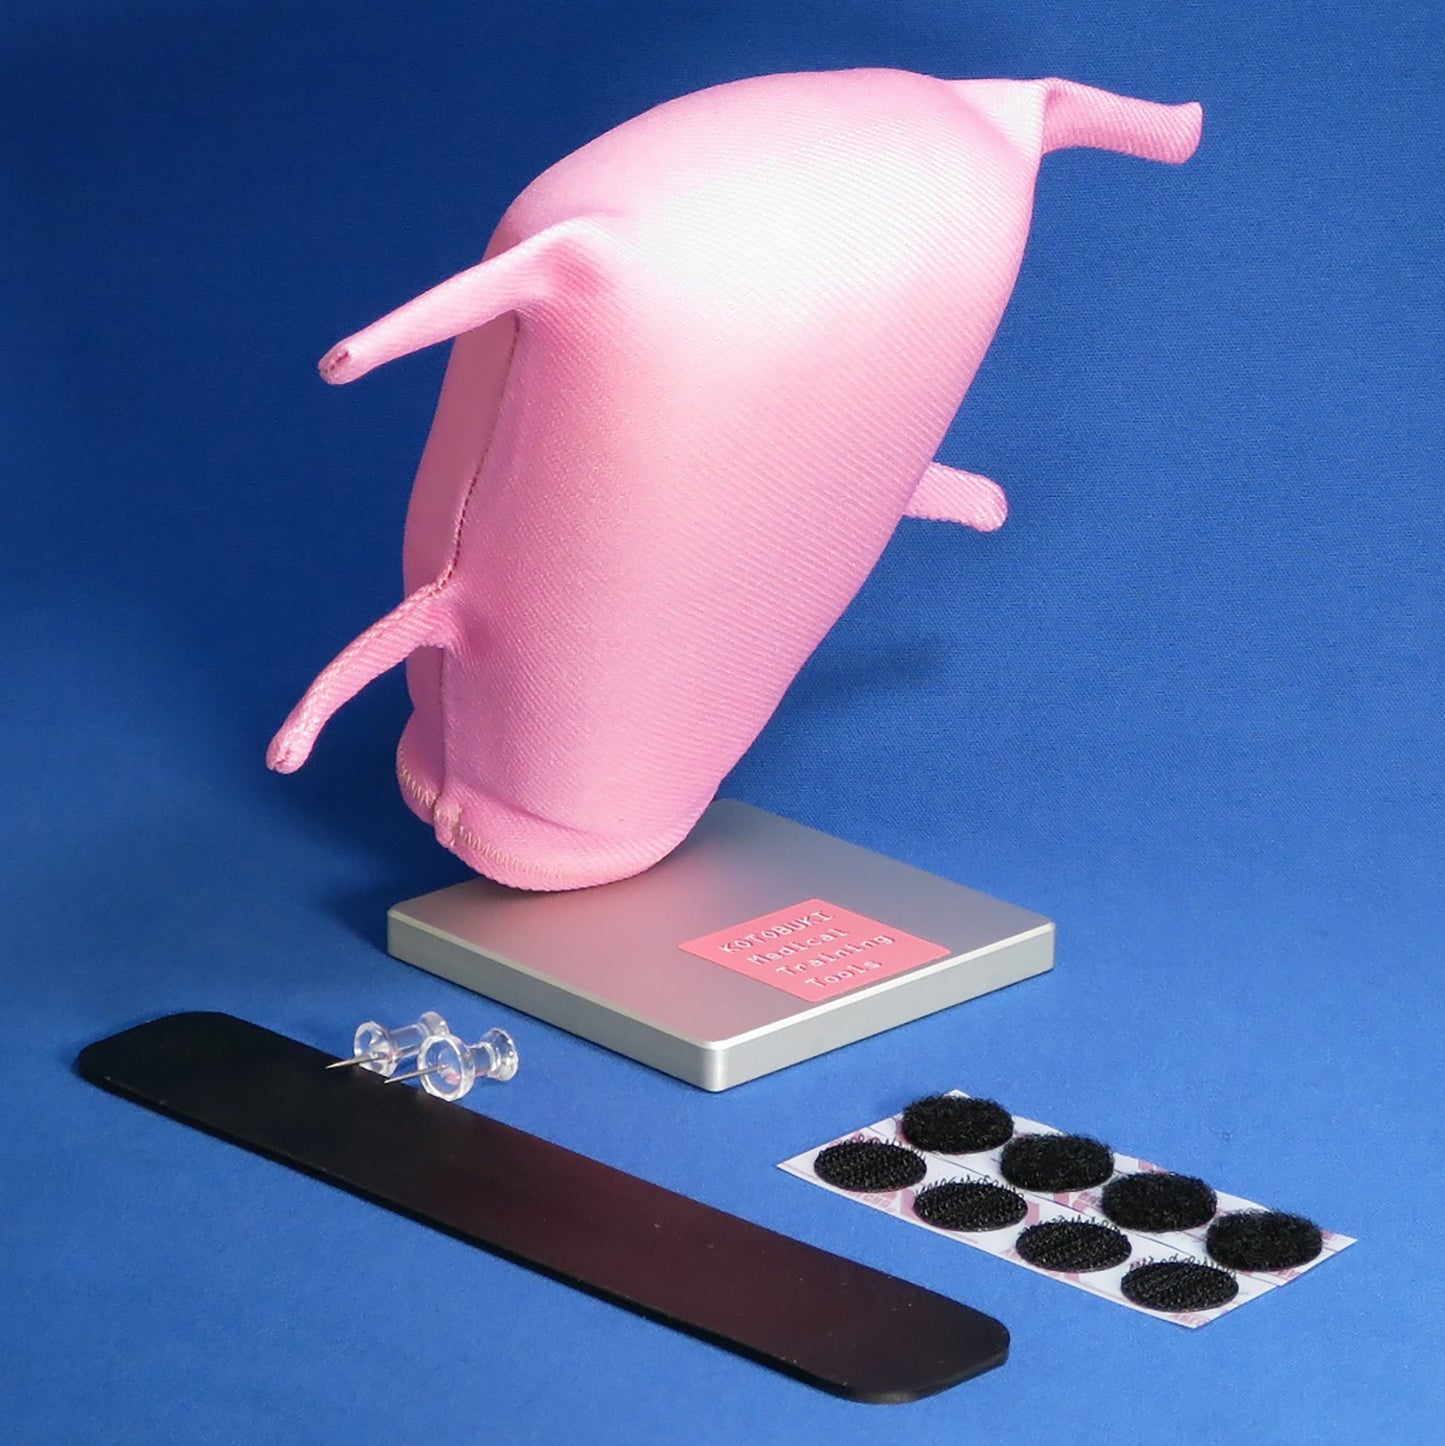 A pink Laparoscopic Myectomy model is propped up on its base for training. This model has four tube-like fabric structures, two on each side, to represent serosa. 